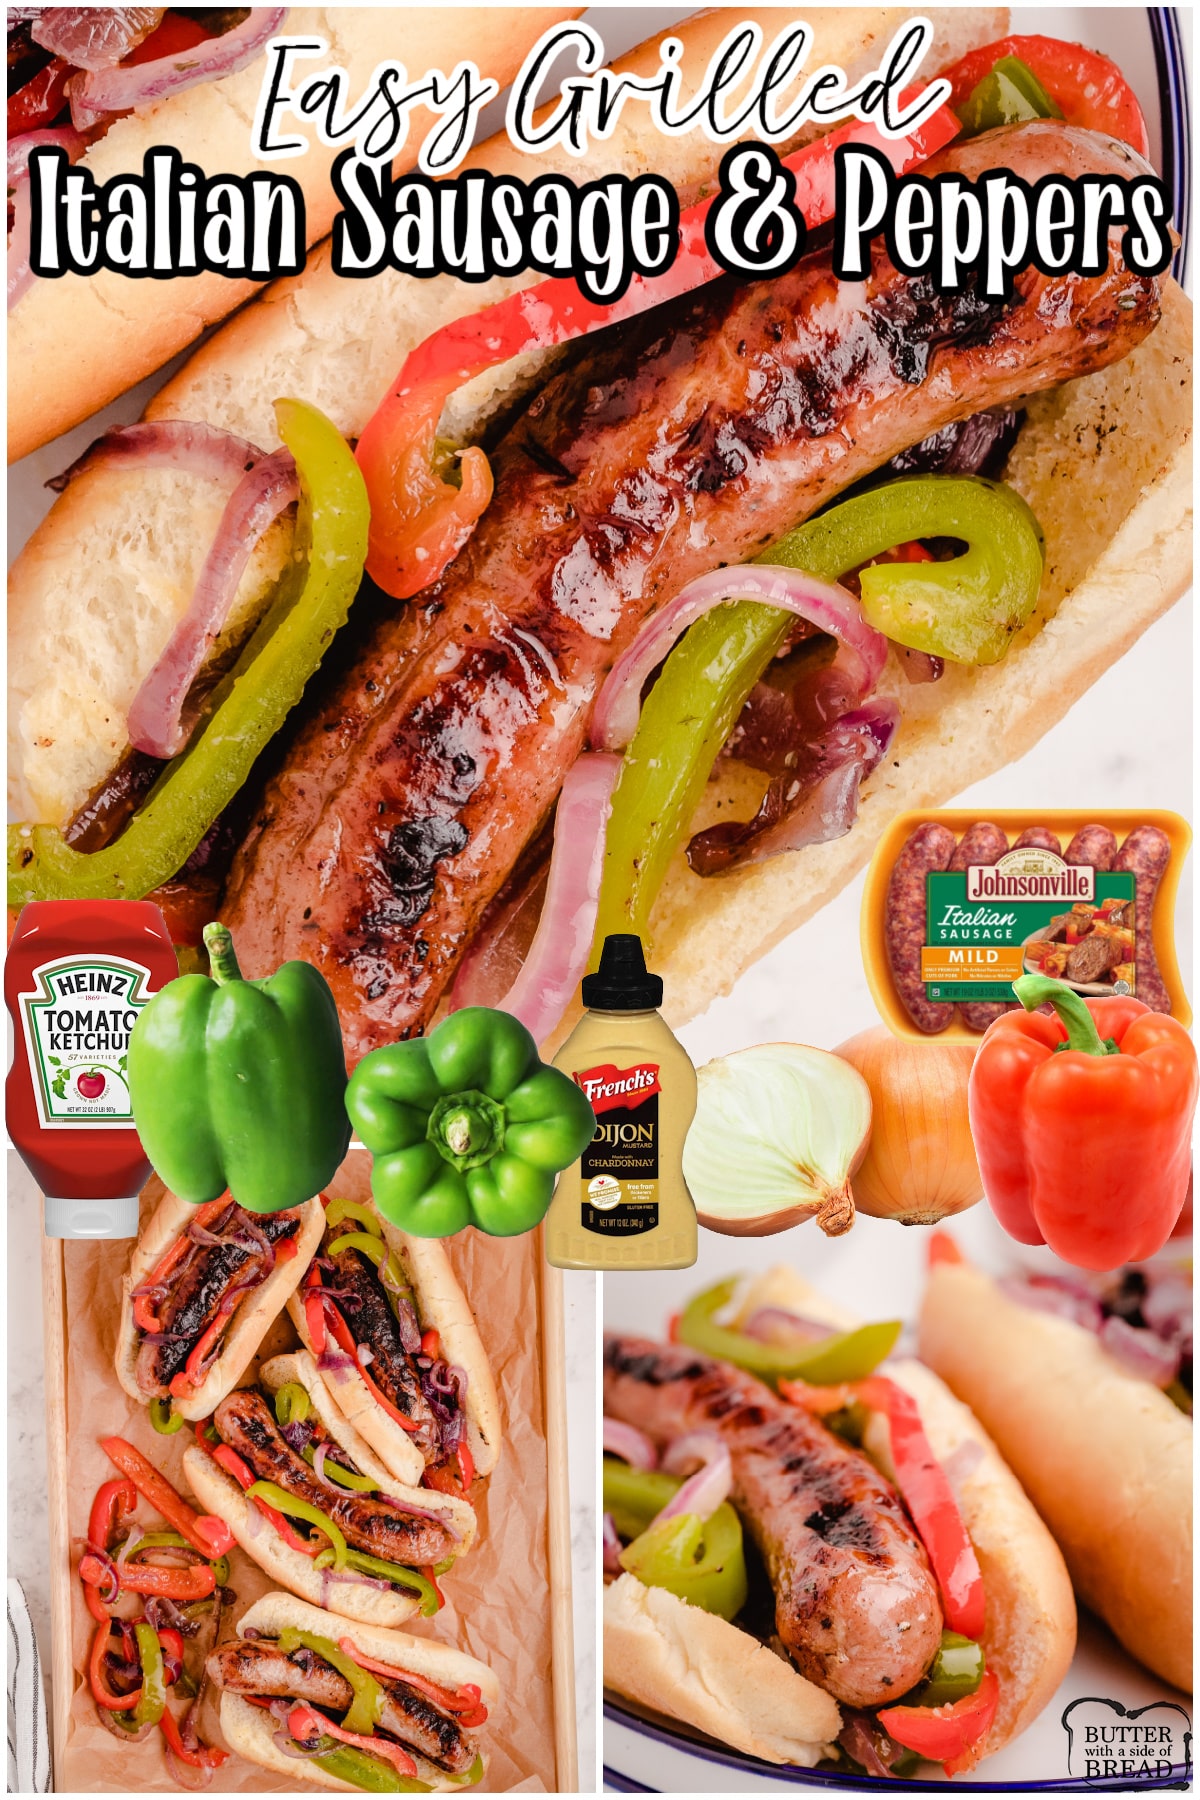 These grilled Italian sausages with peppers are one of our favorite simple dinner ideas! Grill the sausages & pair them with sauteed onions and peppers in a soft bun. Yum!